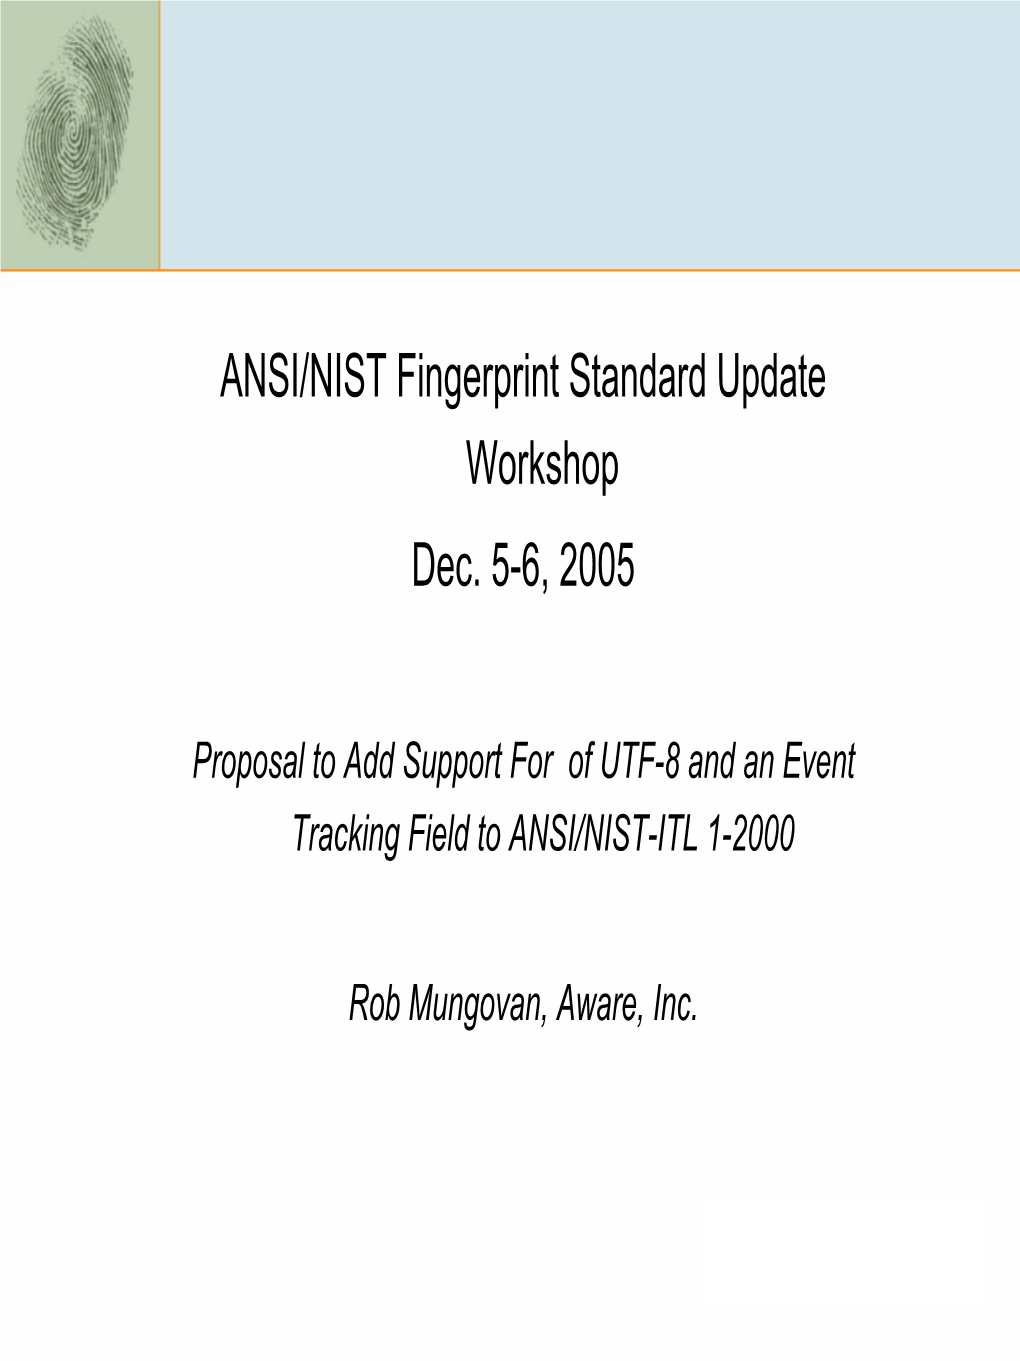 Proposal to Add Support for of UTF-8 and an Event Tracking Field to ANSI/NIST-ITL 1-2000